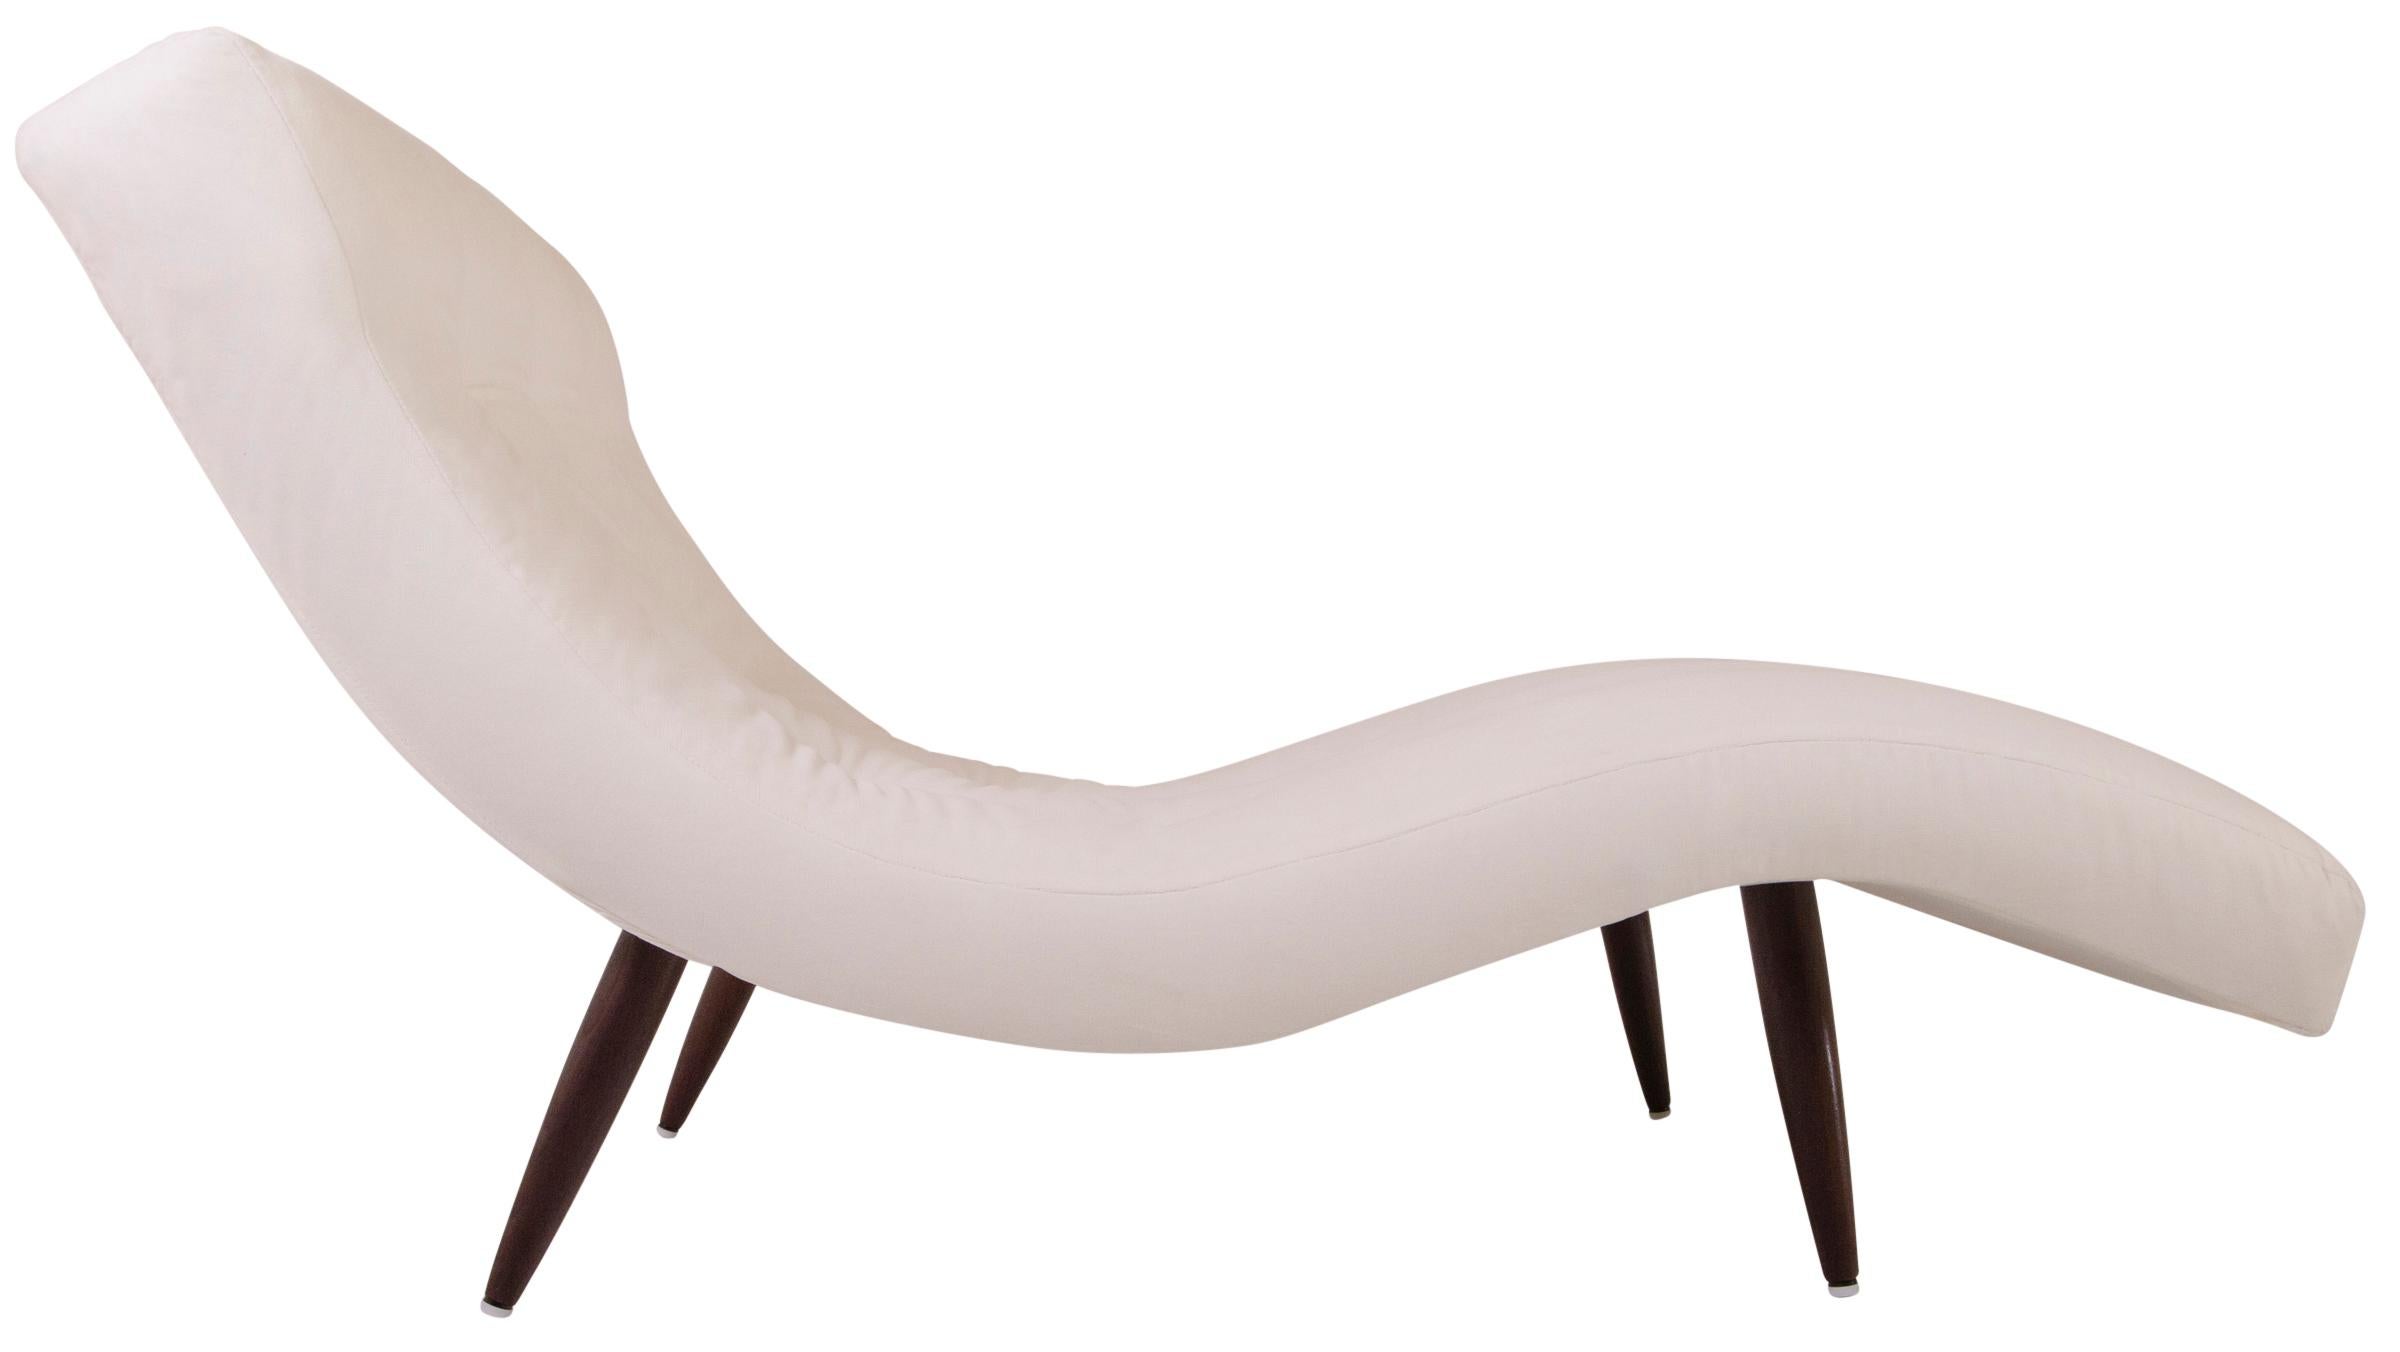 Iconic midcentury design by one of the truly inventive creators, Adrian Pearsall. Delicate yet strong tapered wood legs support a wavy chaise that is generously proportioned to hold two. Meticulously tailored and custom upholstered in a rich Ivory